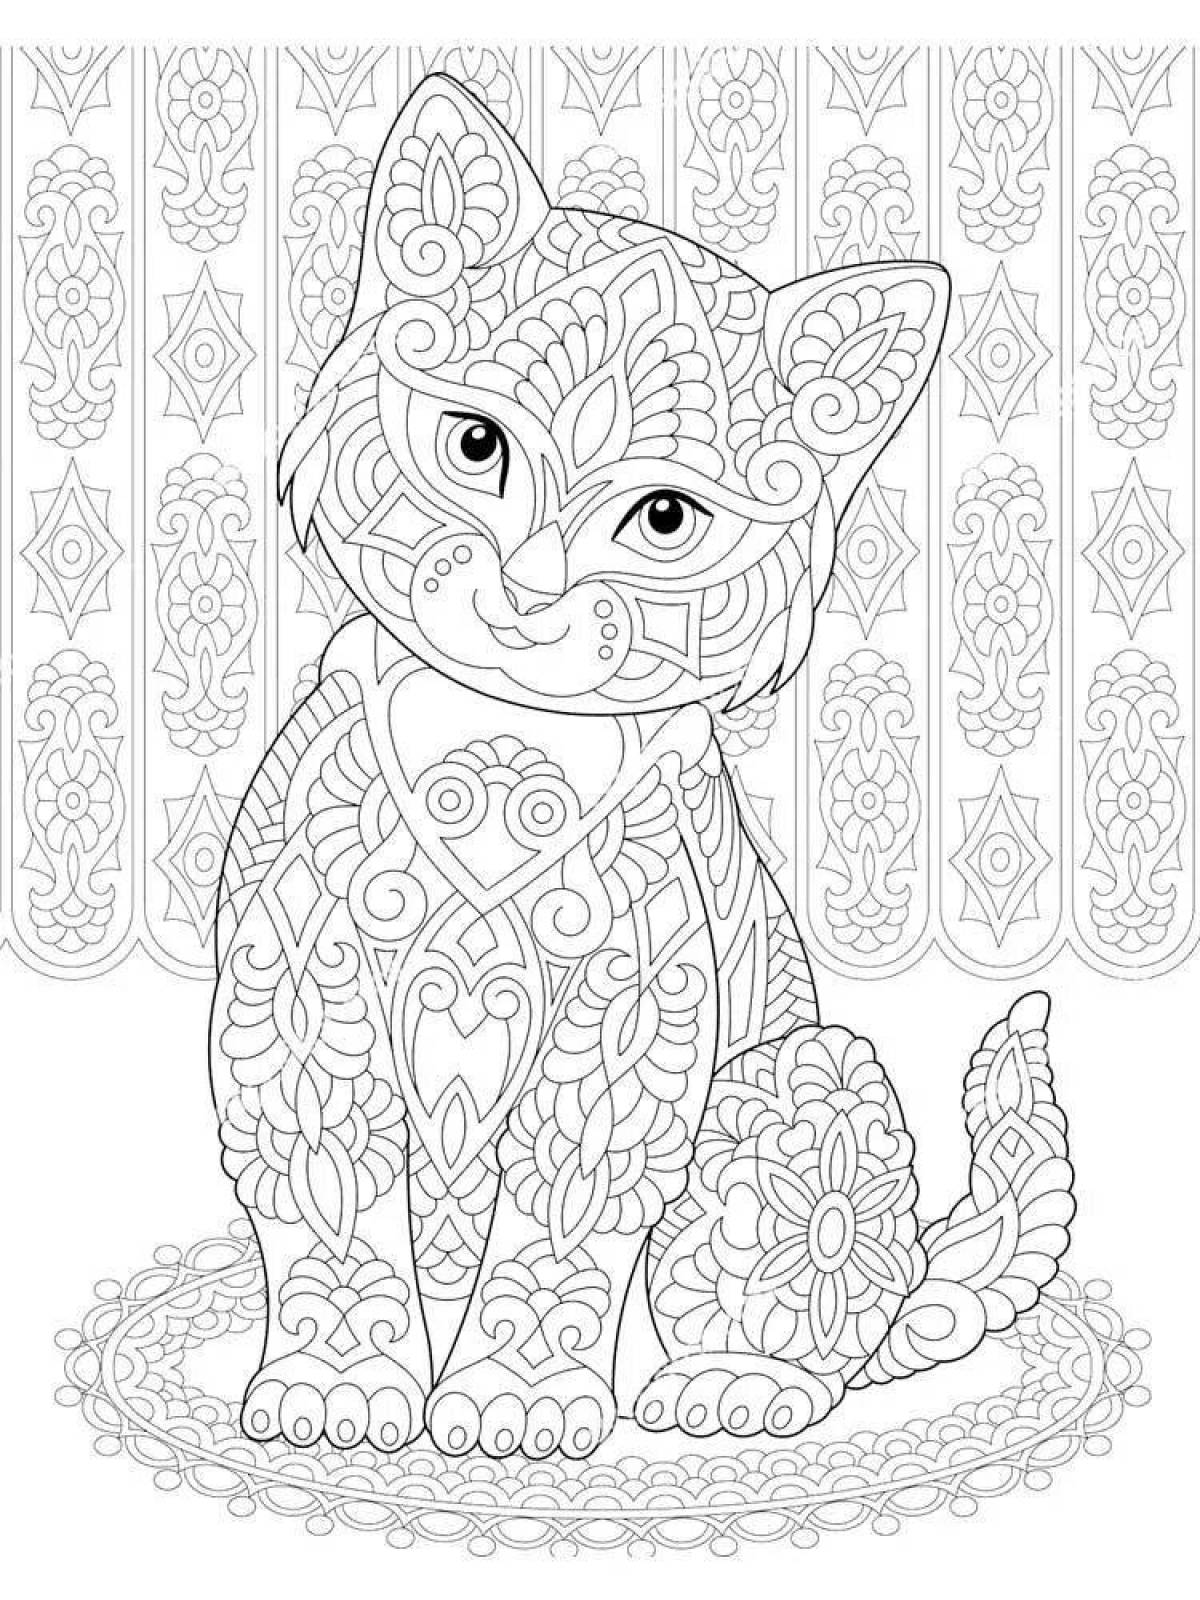 Exquisite coloring for girls 12 years old - cats